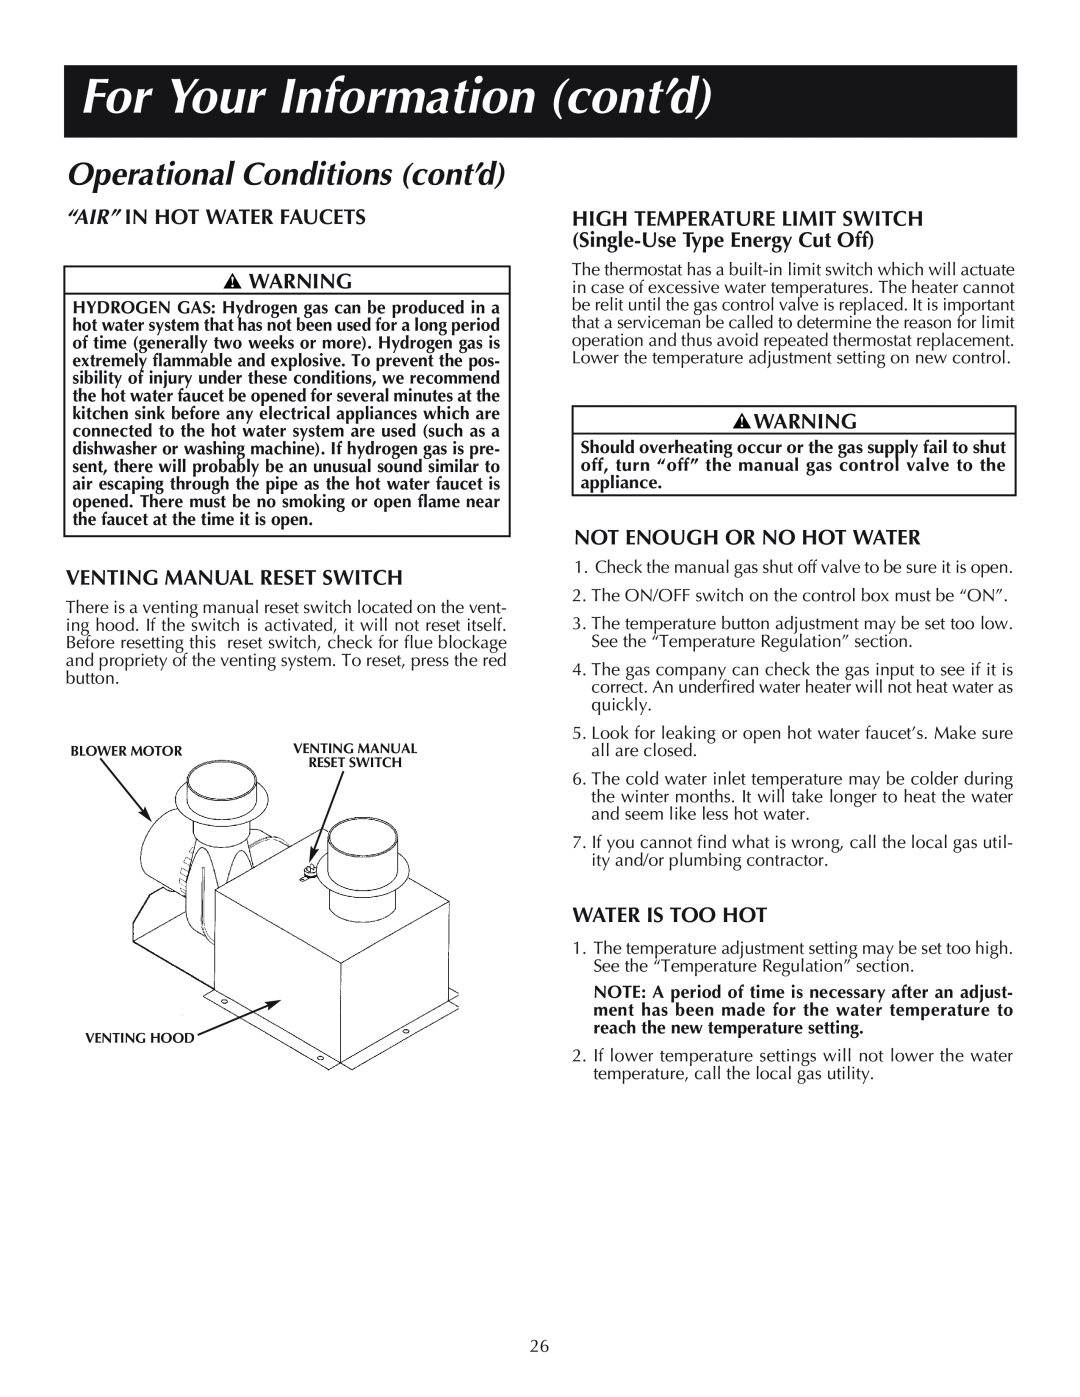 Reliance Water Heaters 184333-001, 606, 11-03 instruction manual For Your Information cont’d, Operational Conditions cont’d 